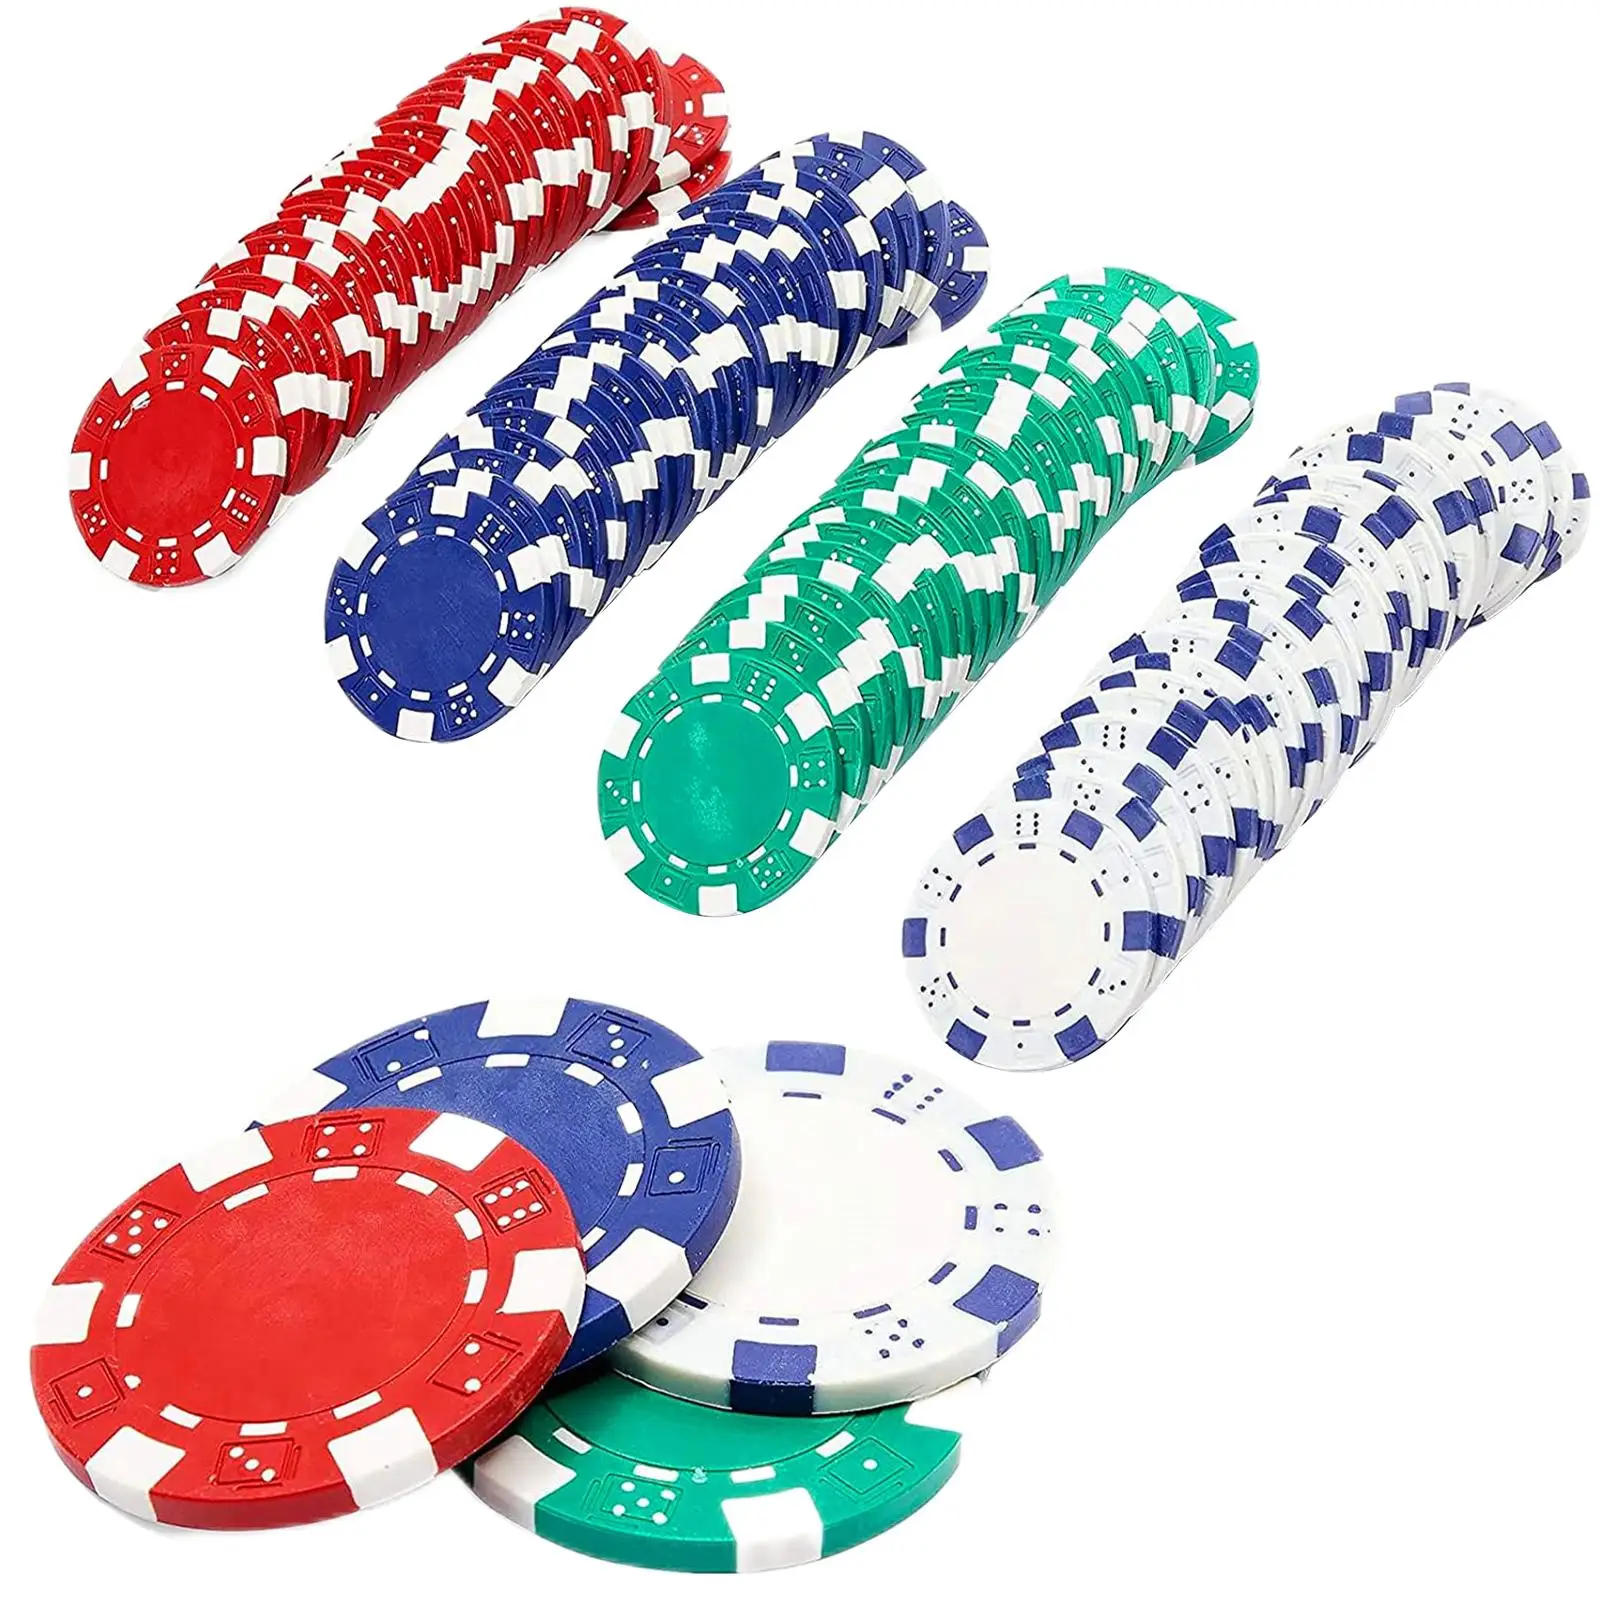 100x ABS Poker Chips Bingo Chips Markers for Board Games Counting Carnival